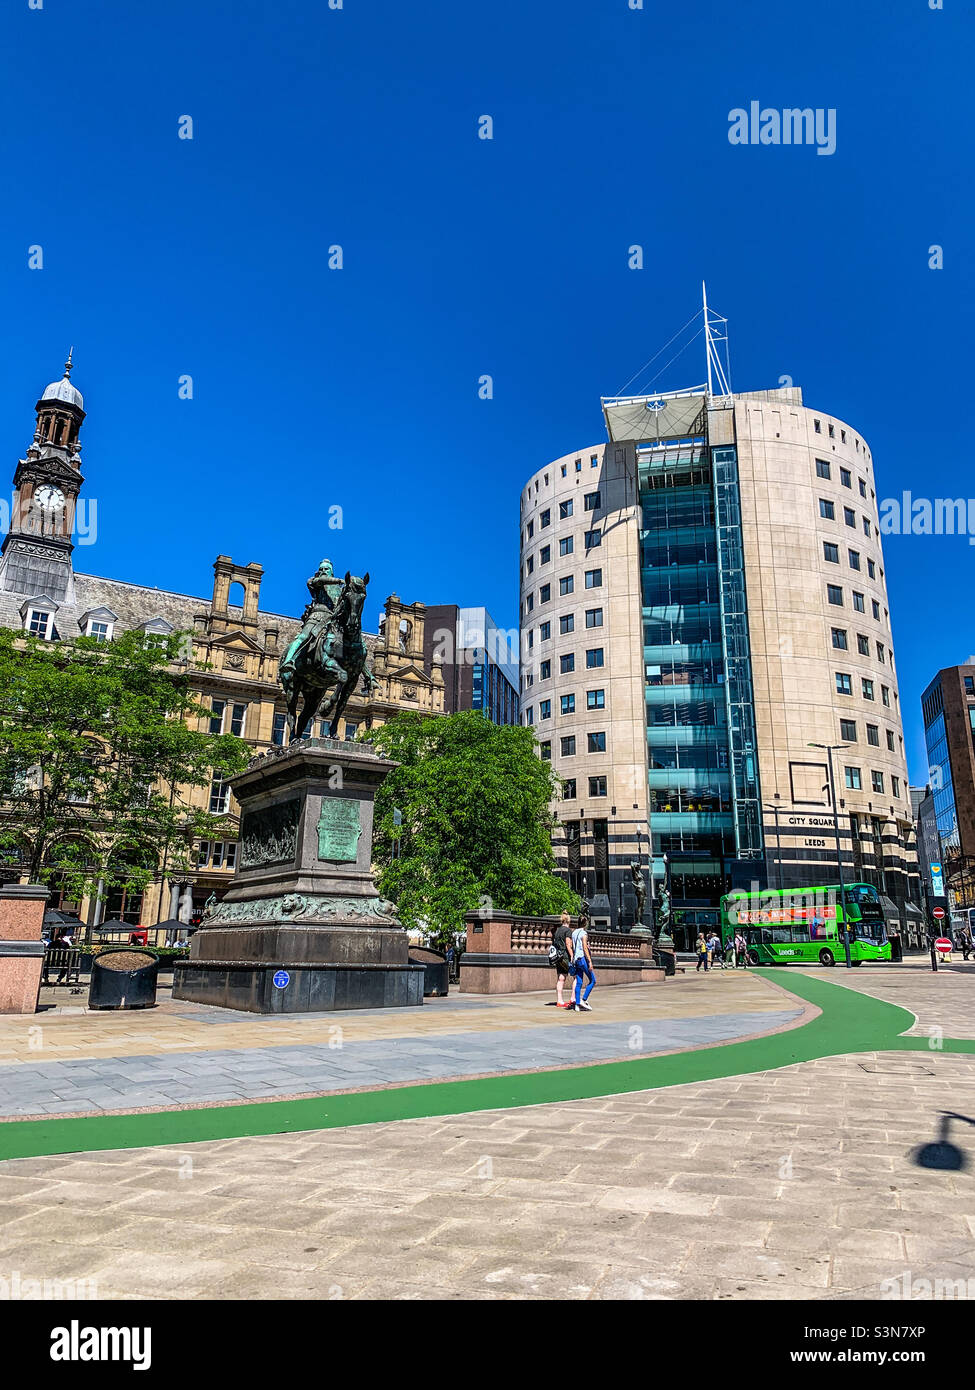 City square in Leeds city centre Stock Photo